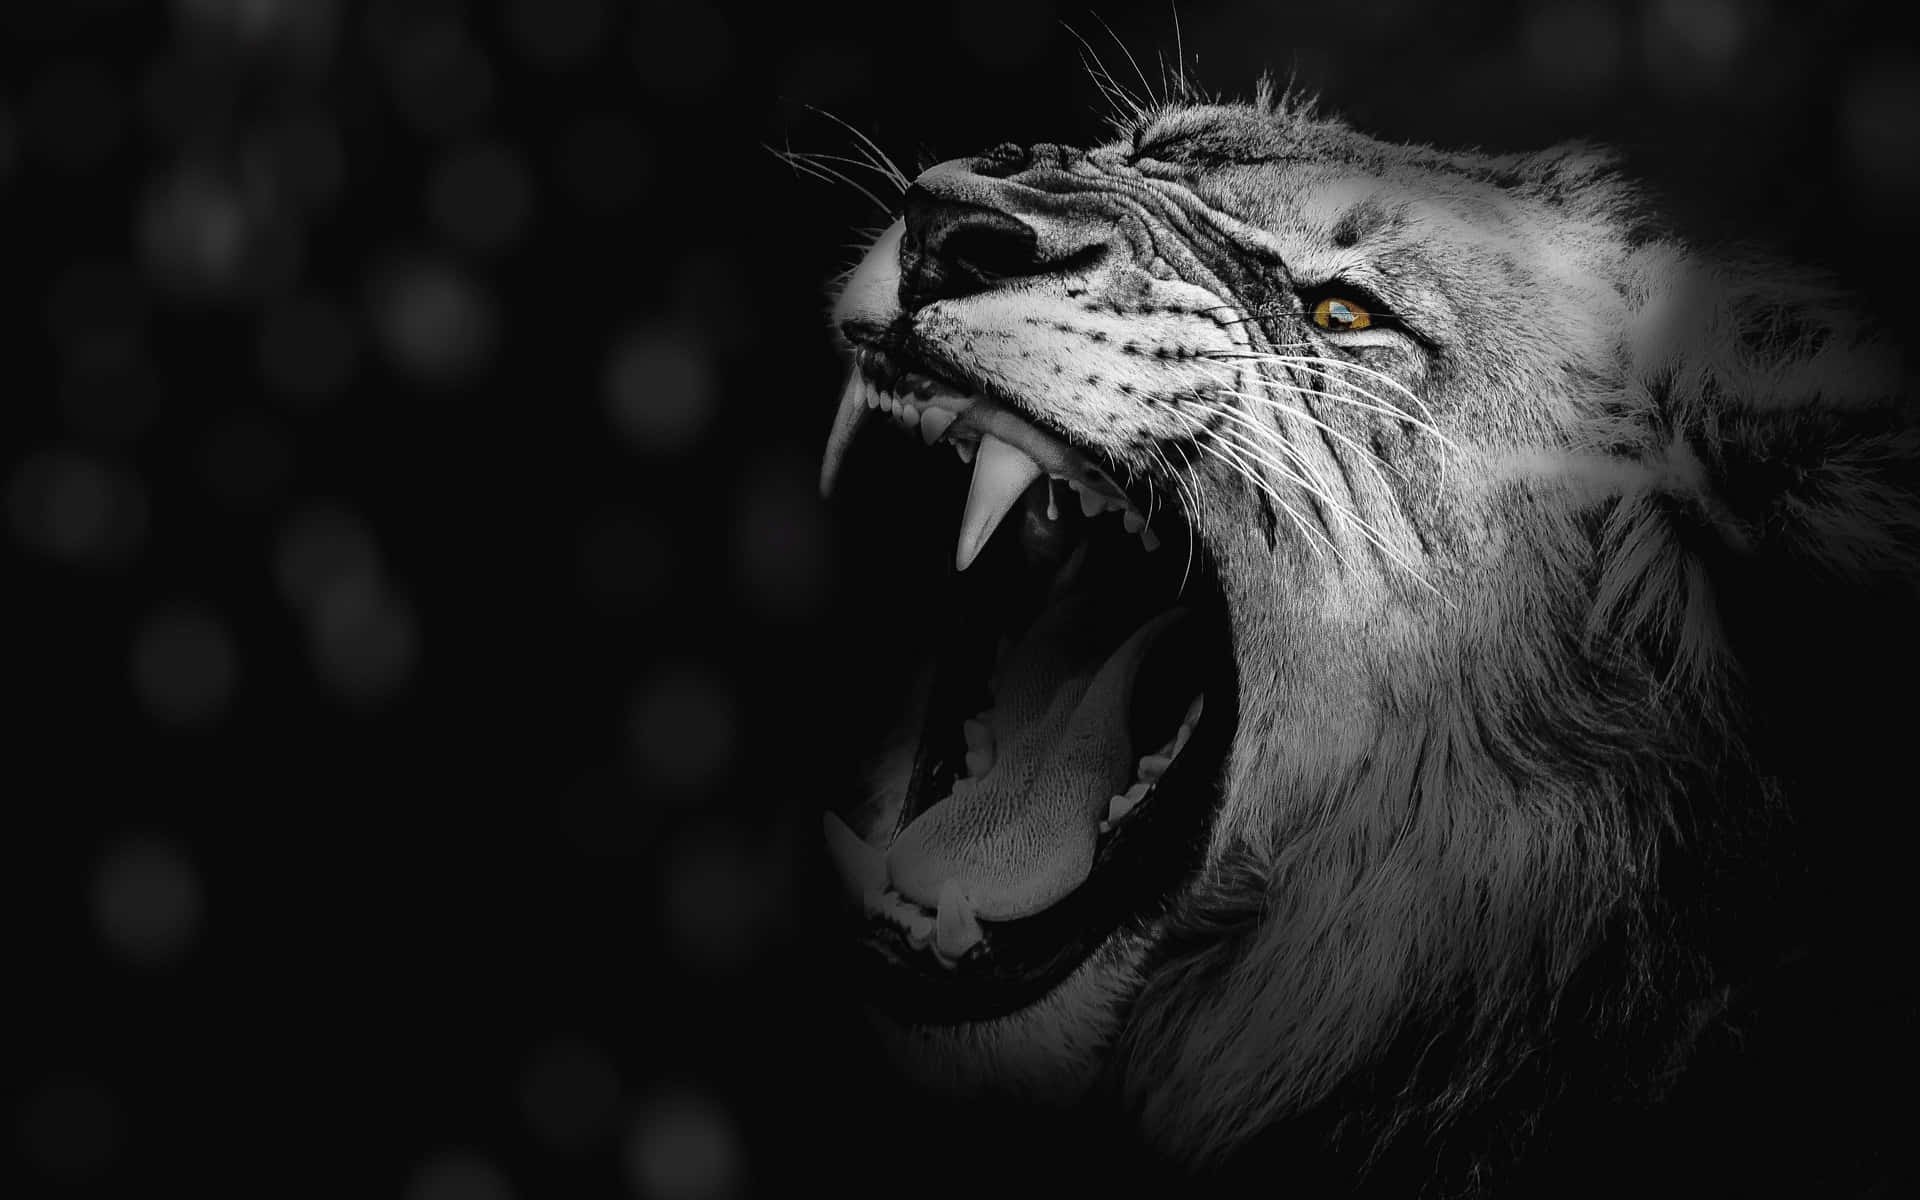 Lion Roars In The Grass With His Mouth Open Background, Lion Roaring  Picture Background Image And Wallpaper for Free Download